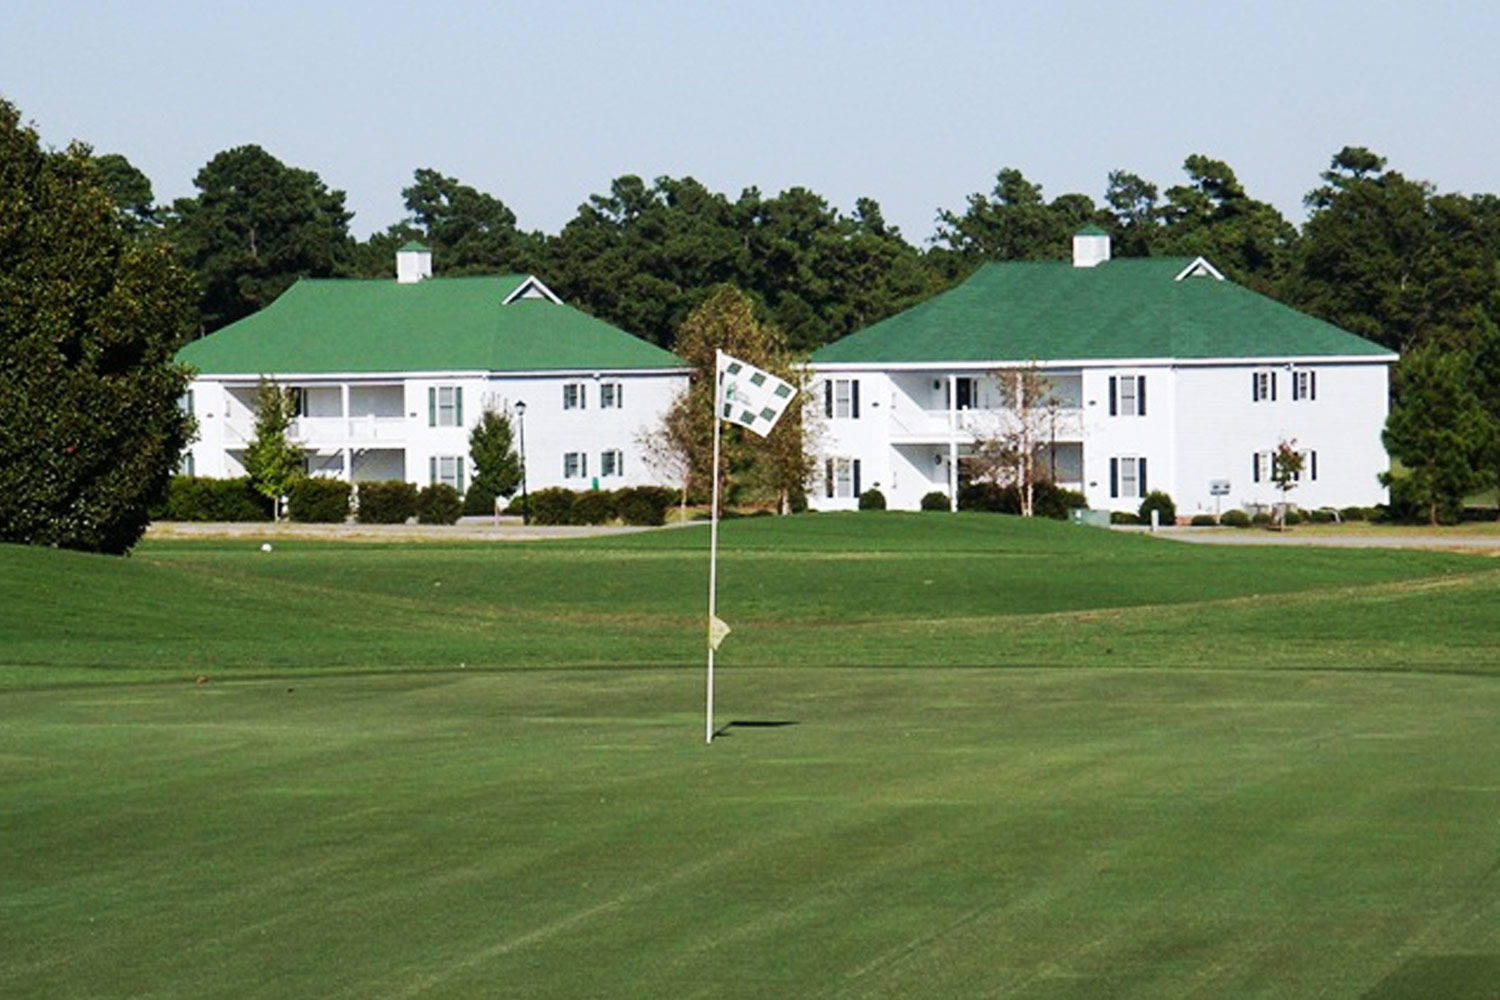 white villas with green roofs with golf course in front